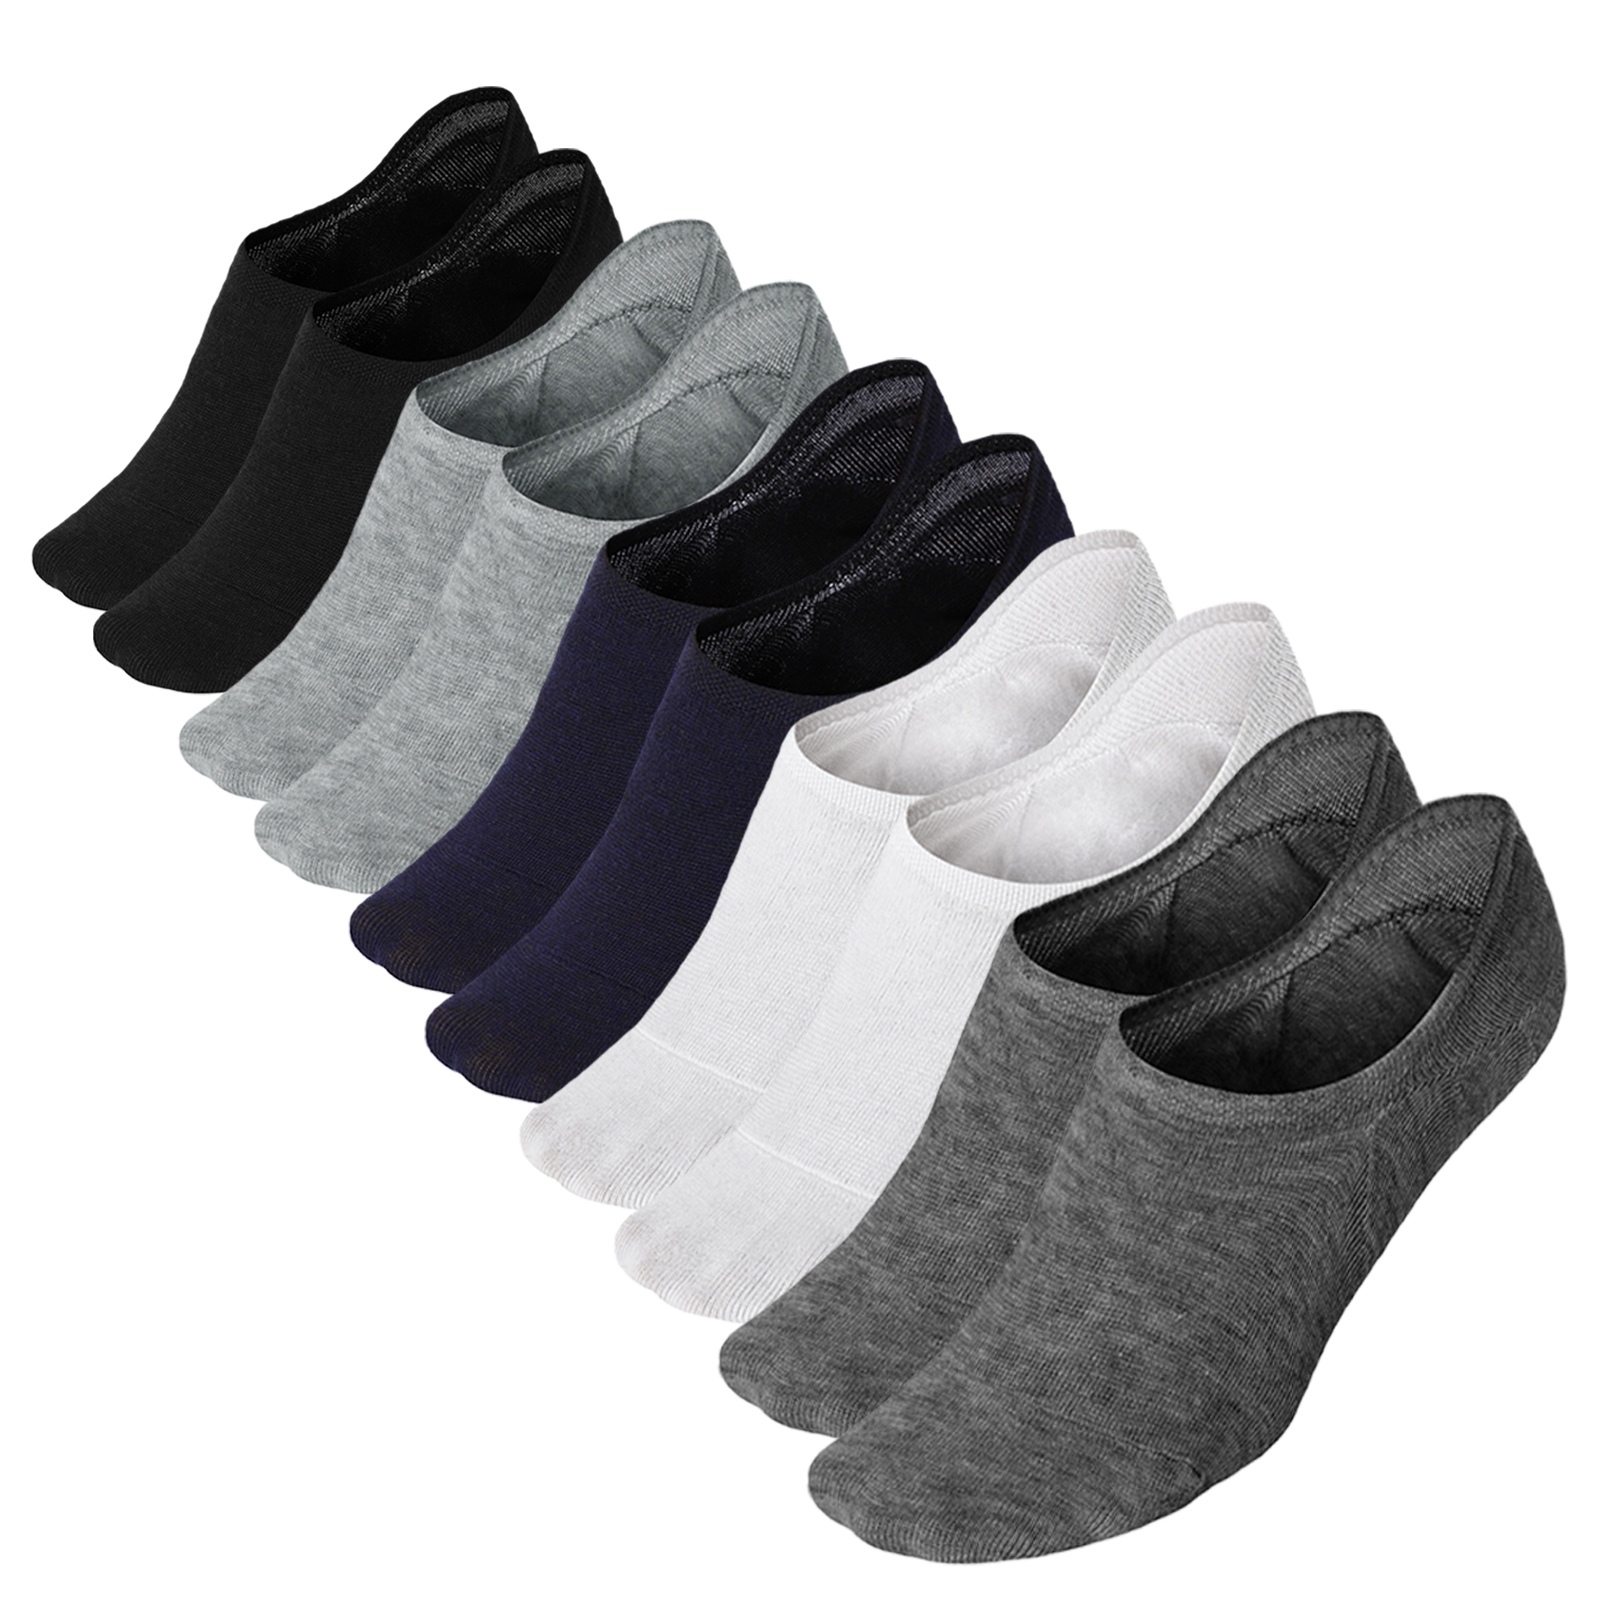 Ladies Breathable No Show Socks with Arch Support, 3 Pair - Walmart.com